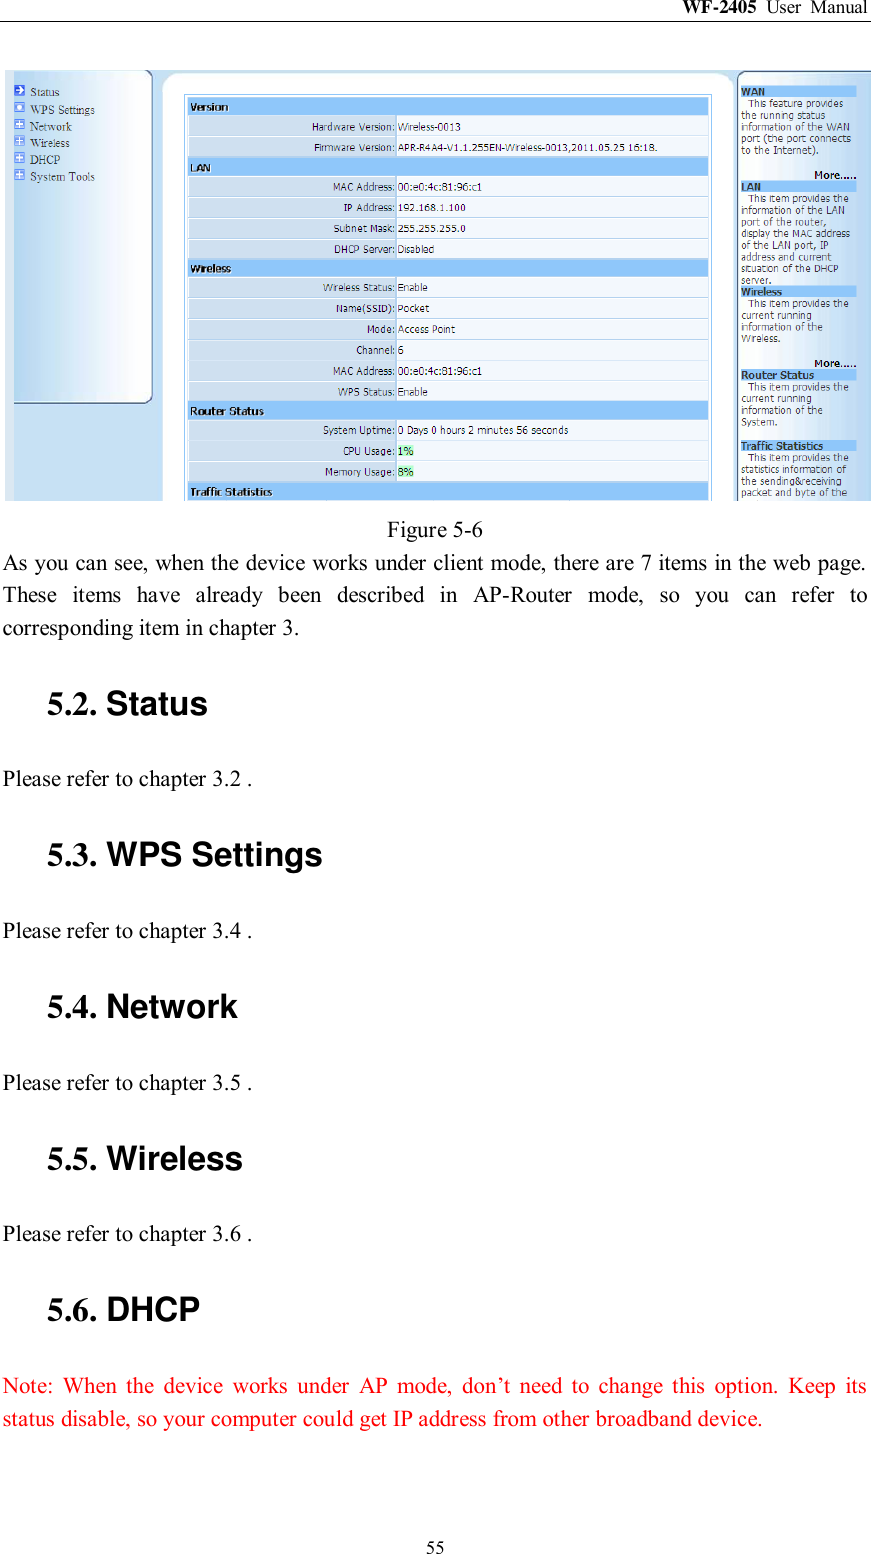 WF-2405  User  Manual  55  Figure 5-6 As you can see, when the device works under client mode, there are 7 items in the web page. These  items  have  already  been  described  in  AP-Router  mode,  so  you  can  refer  to corresponding item in chapter 3. 5.2. Status Please refer to chapter 3.2 . 5.3. WPS Settings Please refer to chapter 3.4 . 5.4. Network Please refer to chapter 3.5 . 5.5. Wireless Please refer to chapter 3.6 . 5.6. DHCP Note:  When  the  device  works  under  AP  mode,  don‟t  need  to  change  this  option.  Keep  its status disable, so your computer could get IP address from other broadband device. 